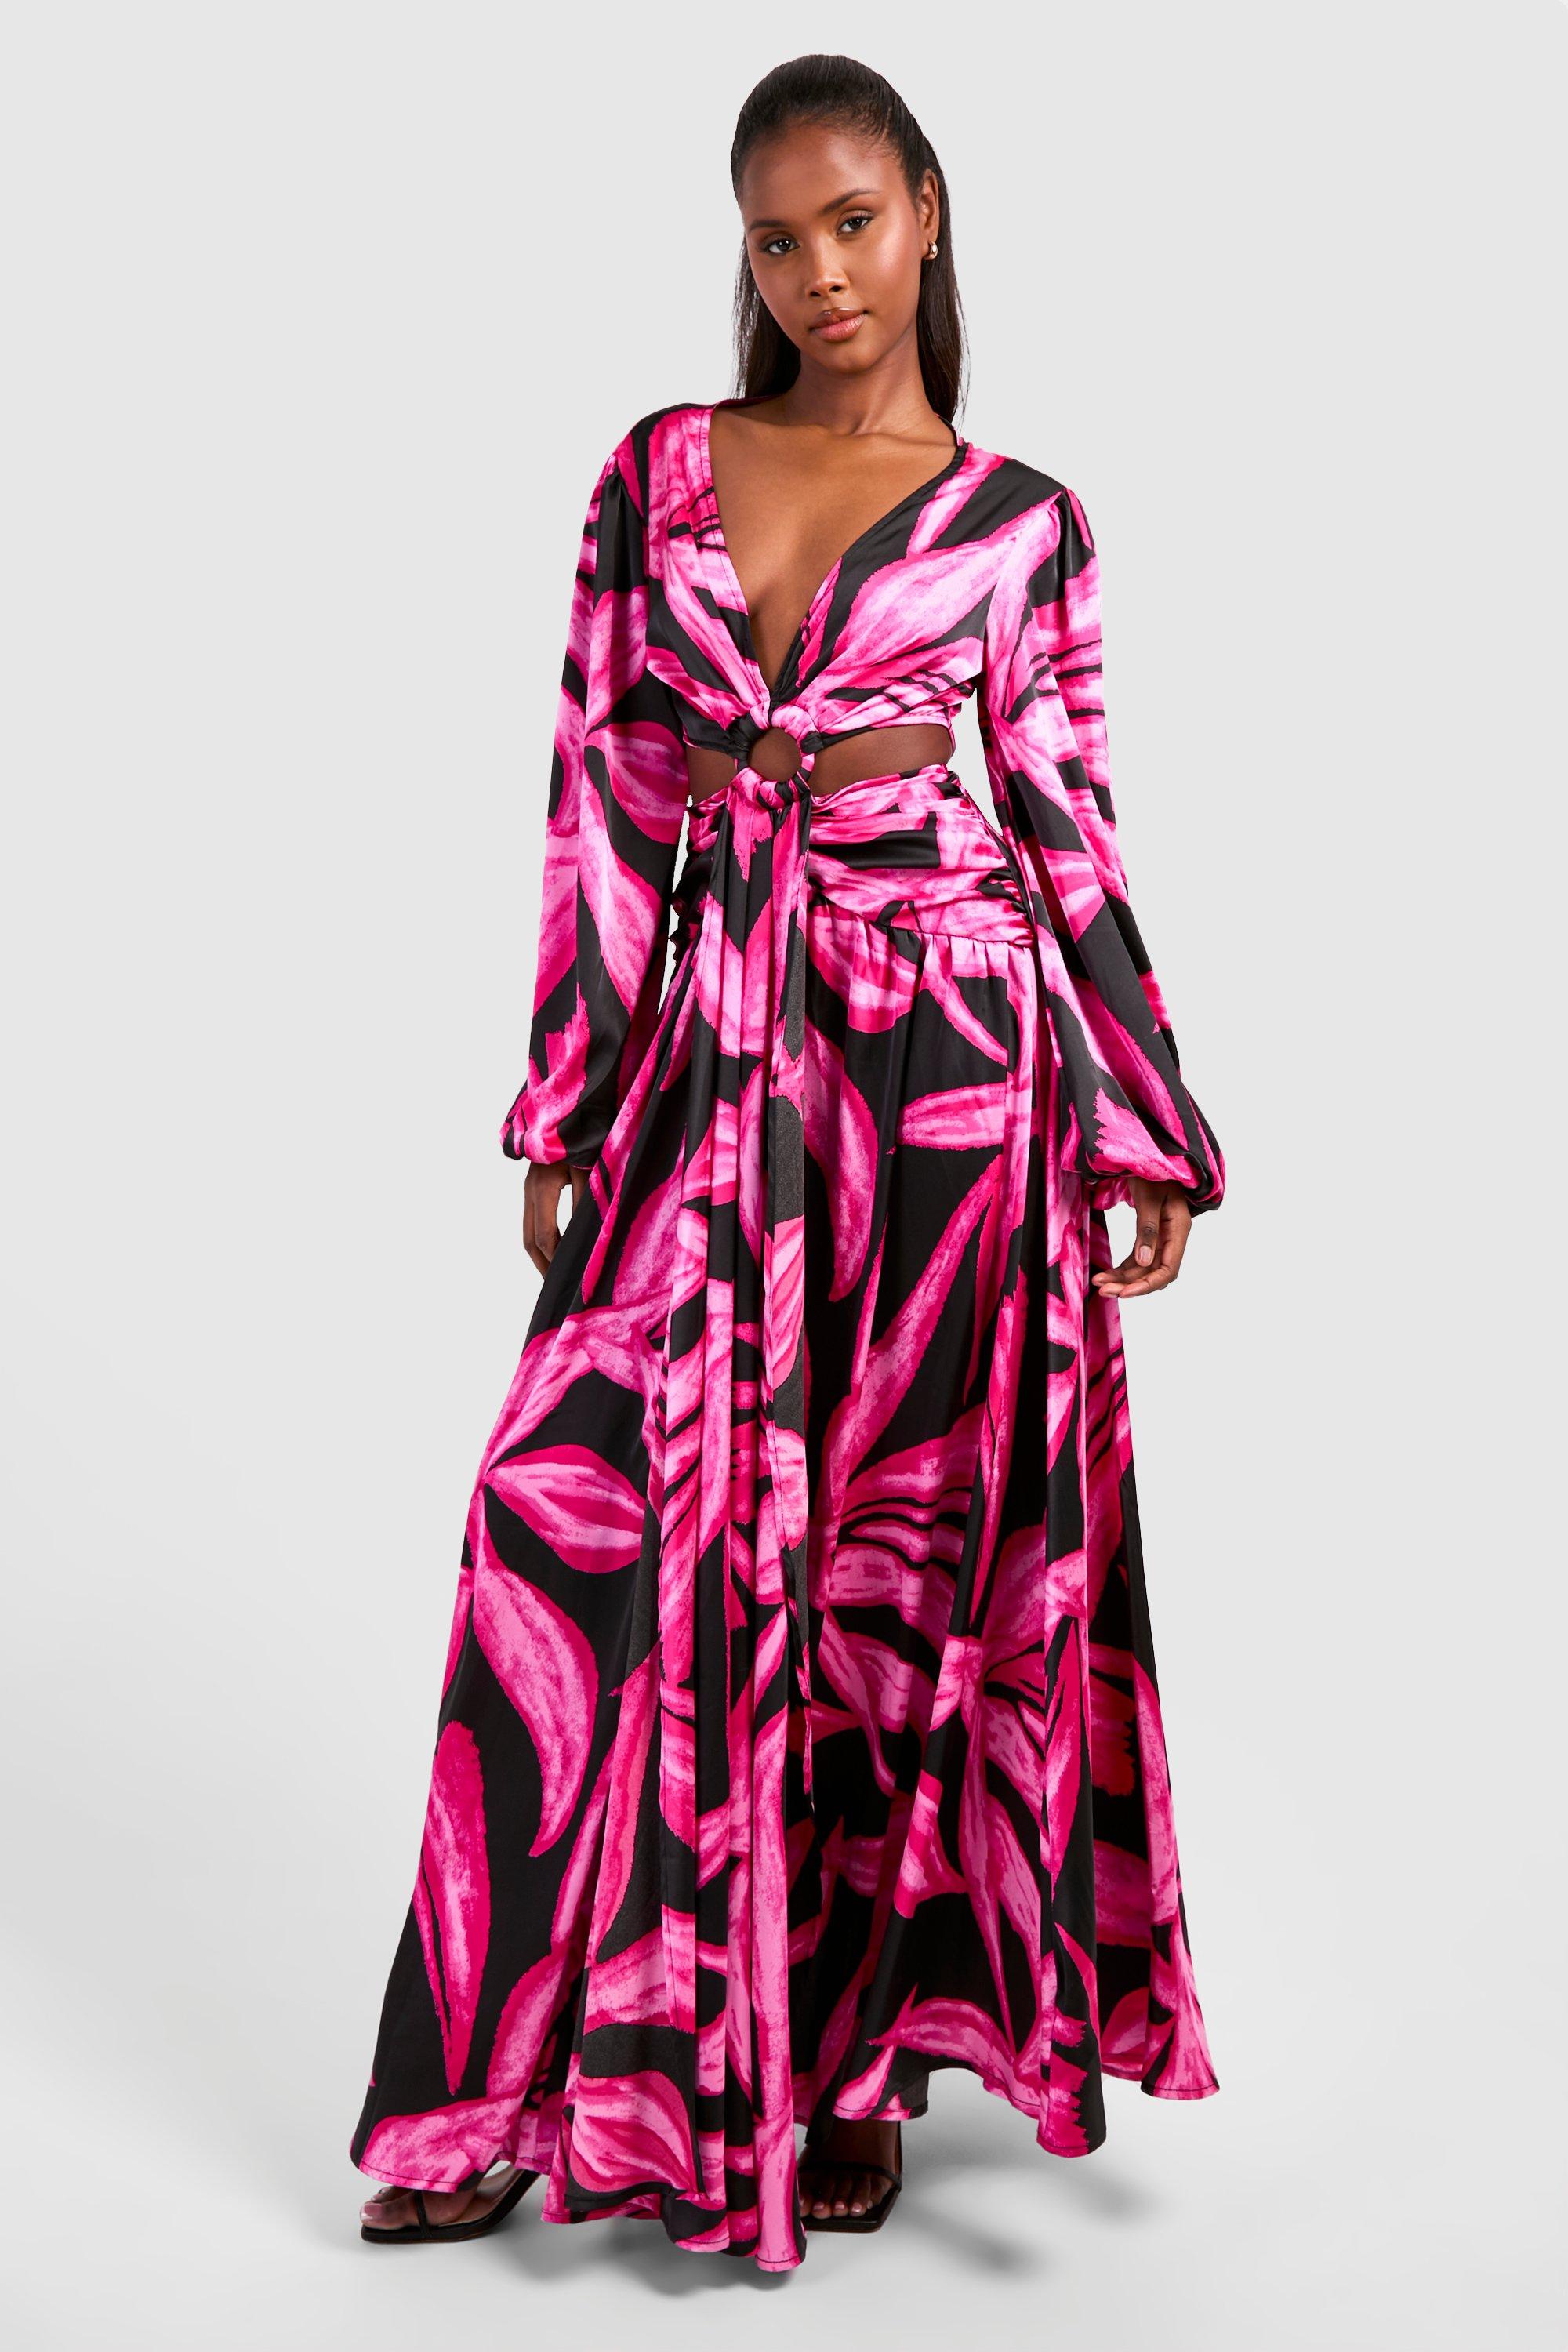 Image of Abstract Print Cut Out Ring Detail Maxi Dress, Pink